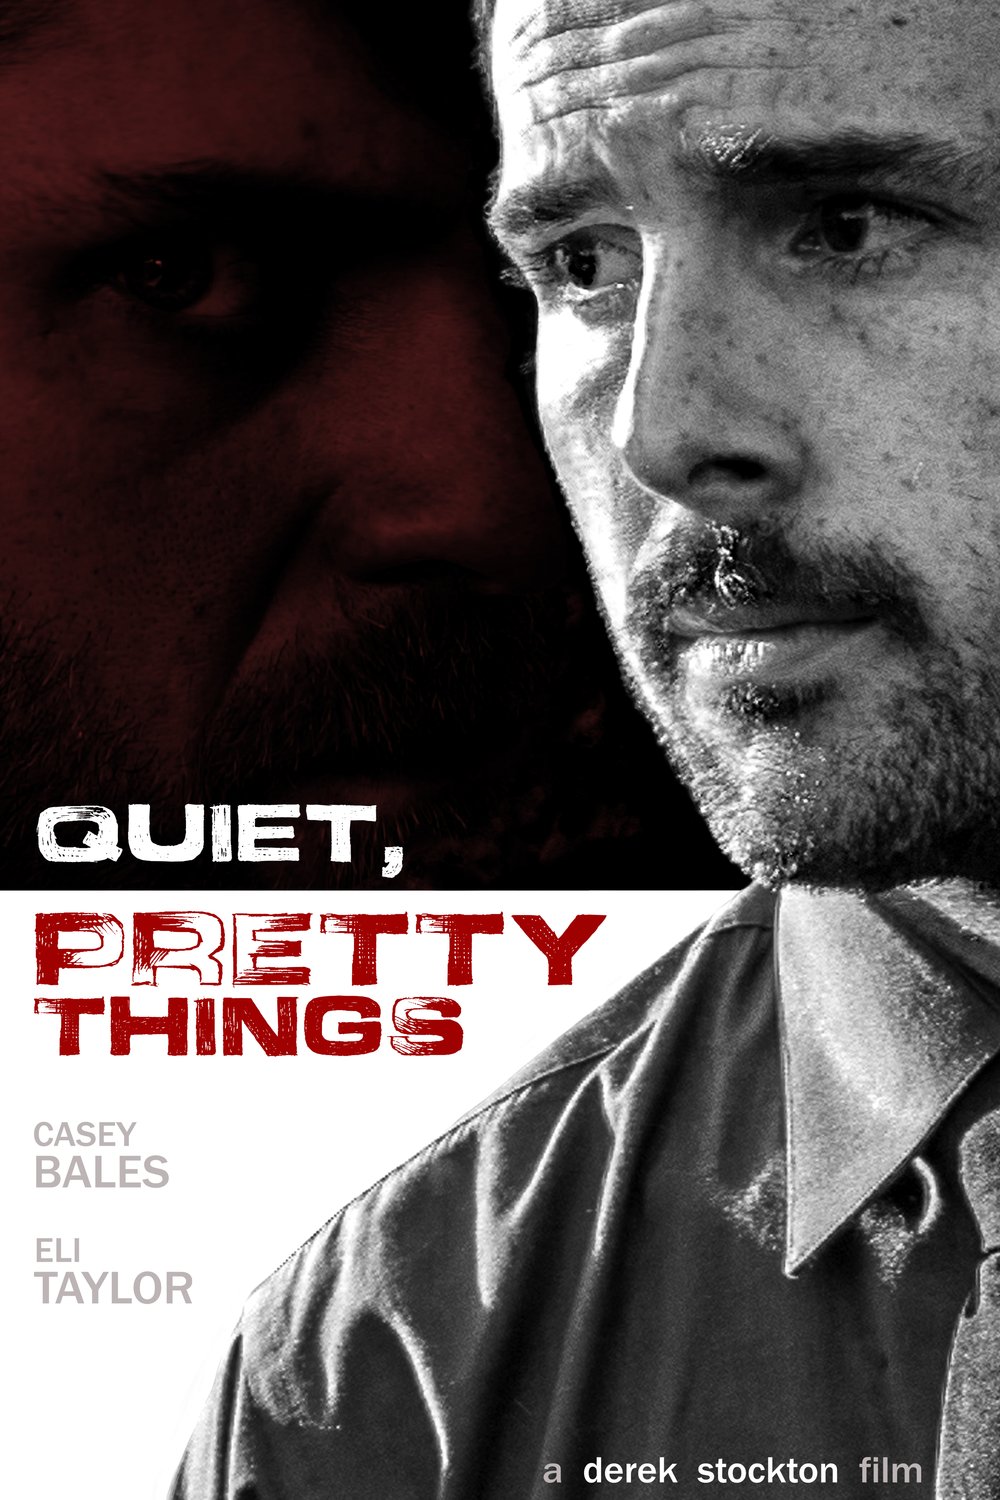 Poster of the movie Quiet, Pretty Things